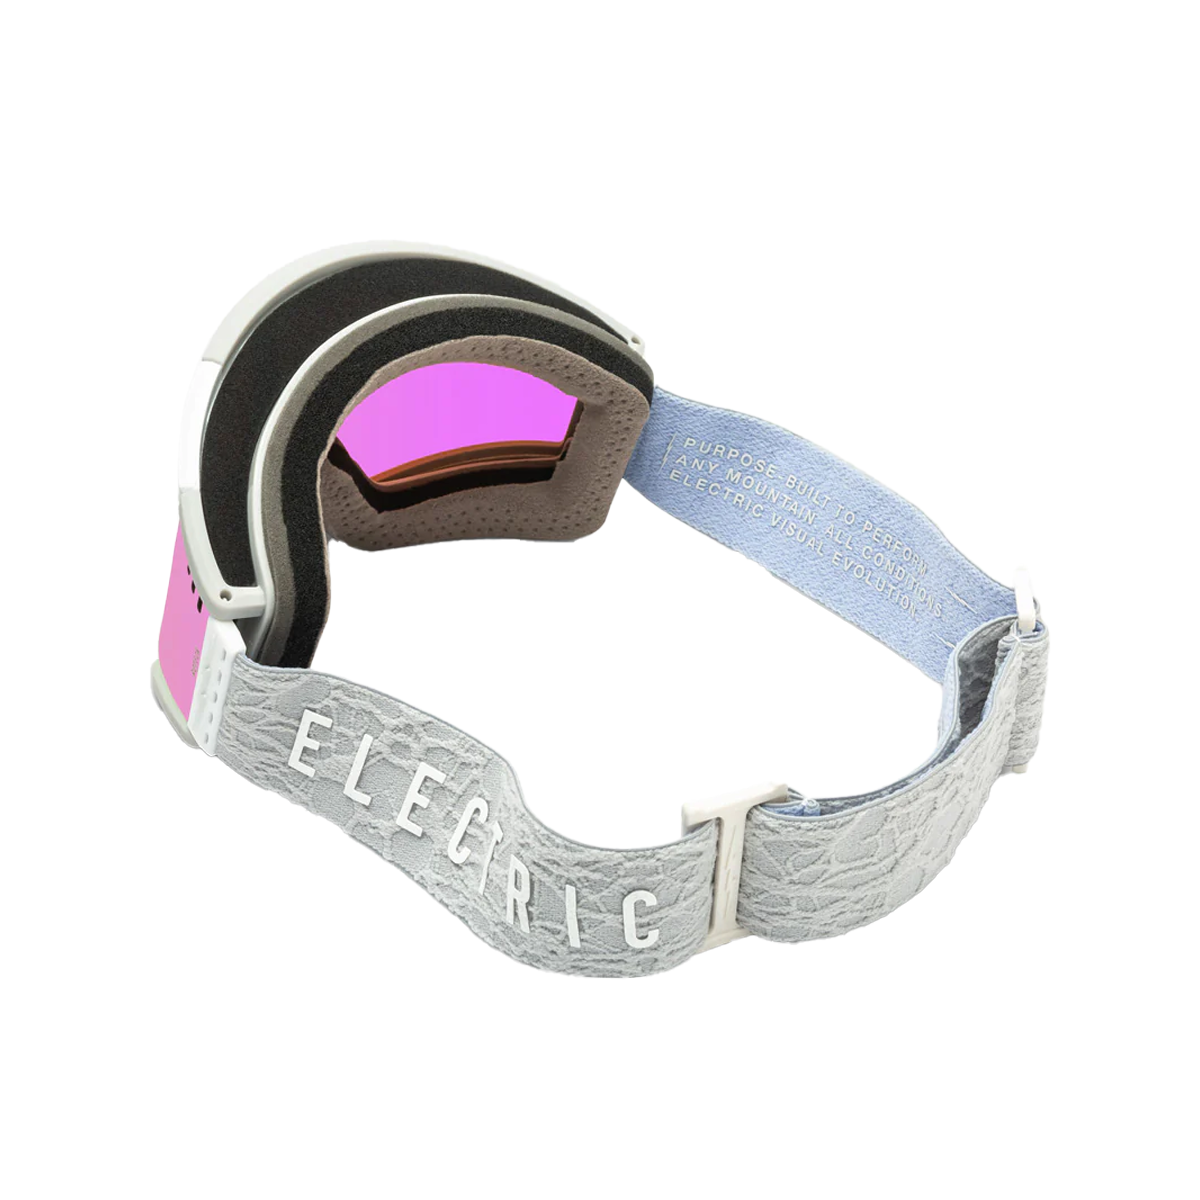 Electric Roteck Goggles - Matte Grey Neuron / Coyote Pink